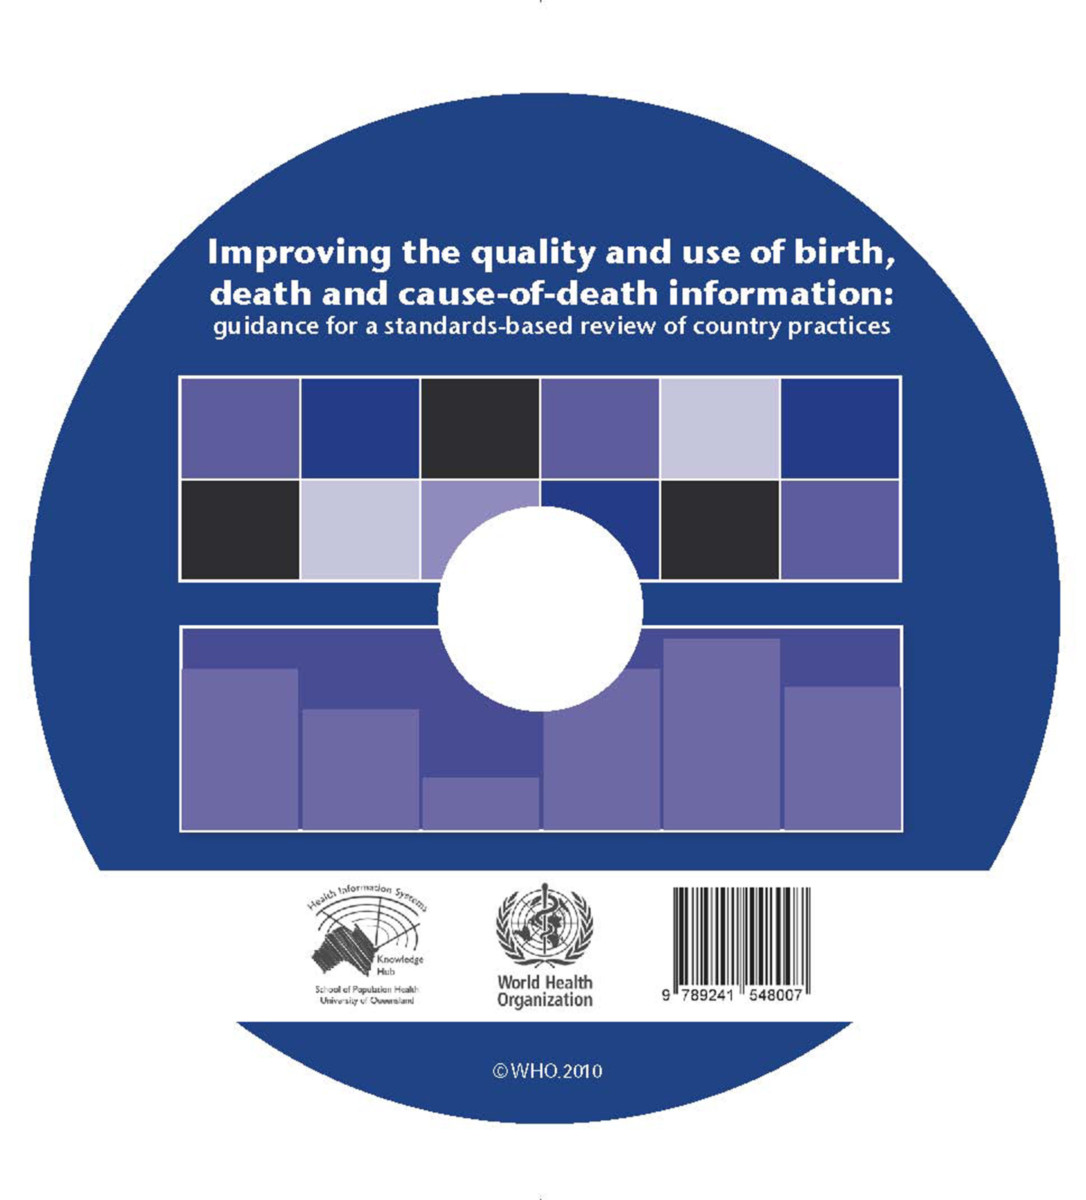 Improving the Quality and Use of Birth, Death & Cause-of-death Information CD-ROM